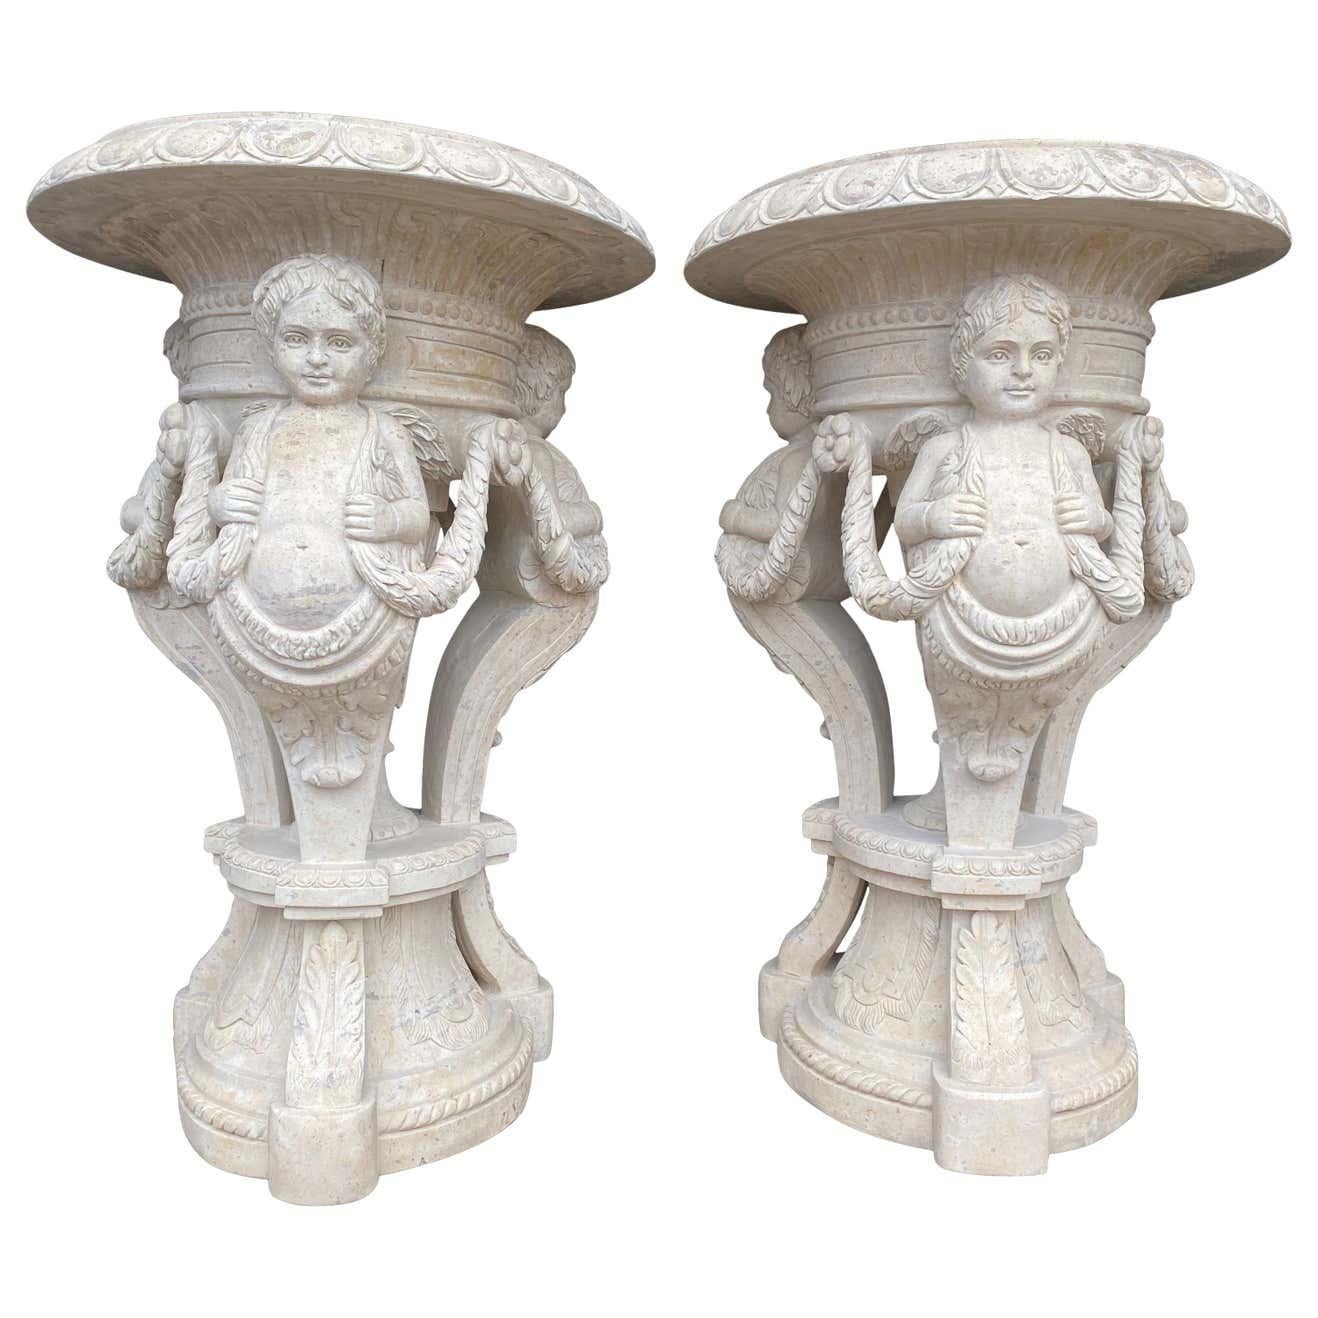 A stunning 20th century large pair of hand carved marble planters. Decorated with cherubs and swags of foliage with egg-and-dart moulding to the rim. Sat on circular bases this pair have astounding presence. Perfect as garden ornaments and home